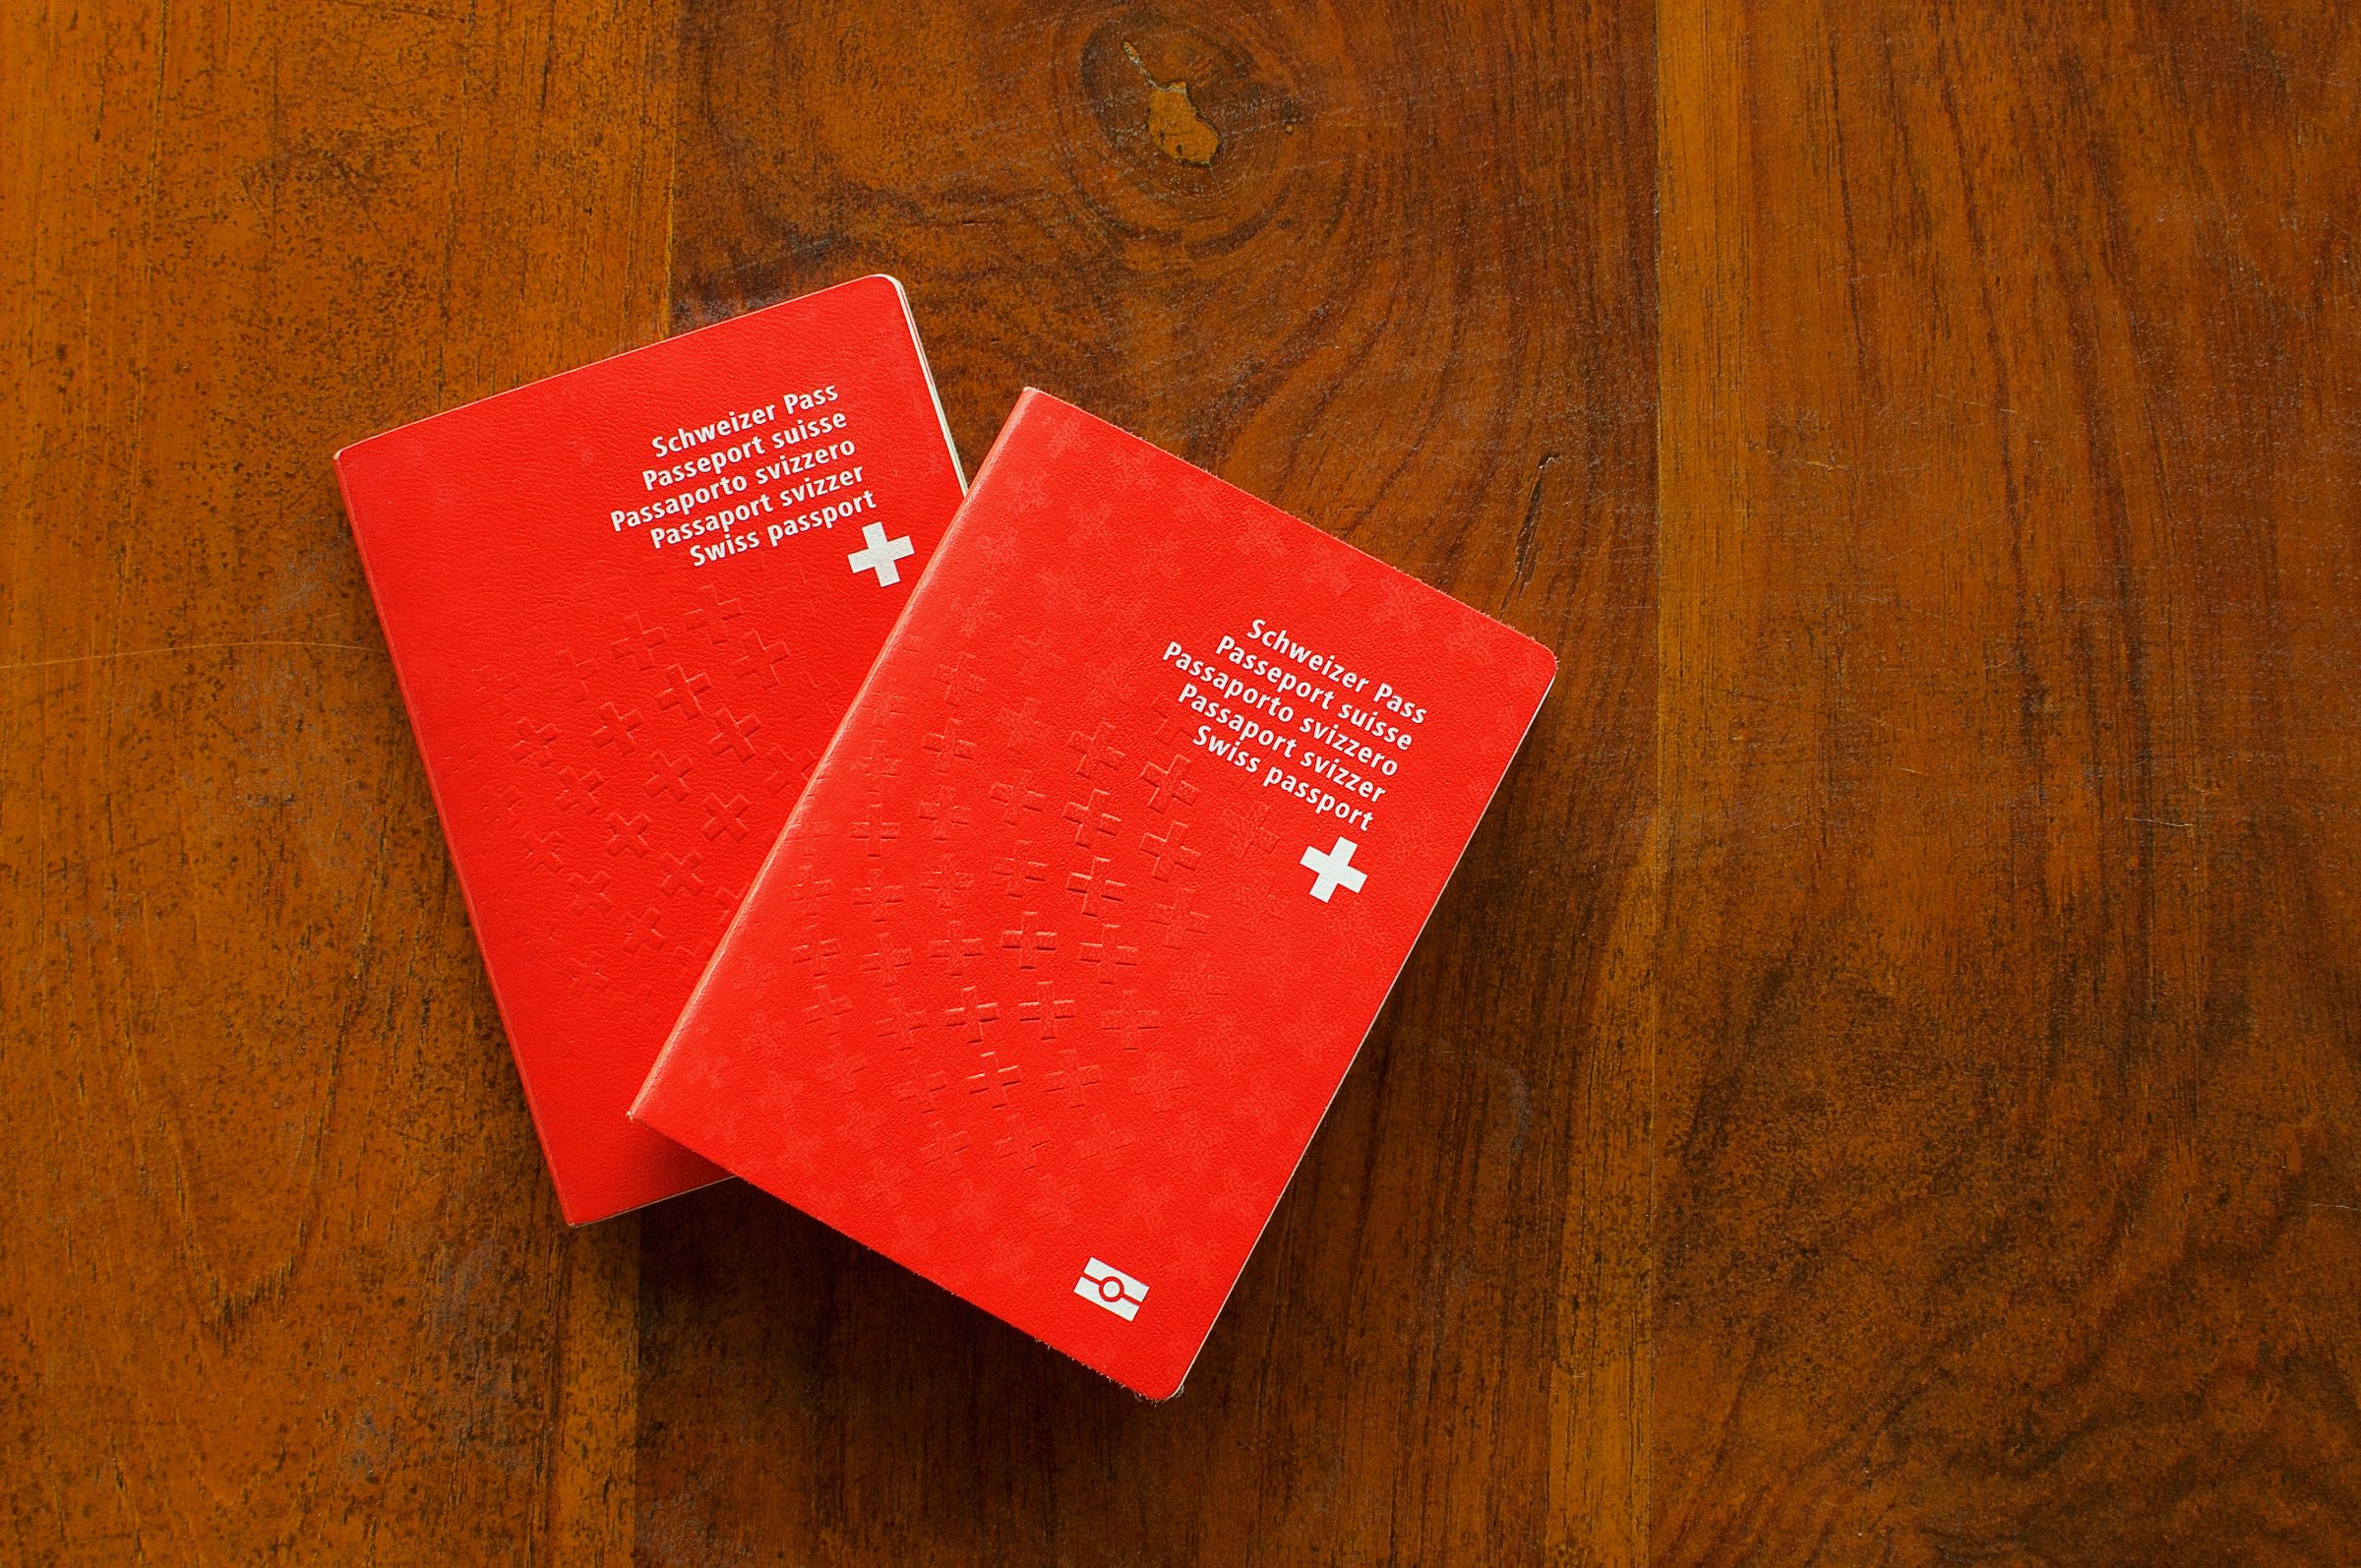 can i travel in europe with swiss residence permit